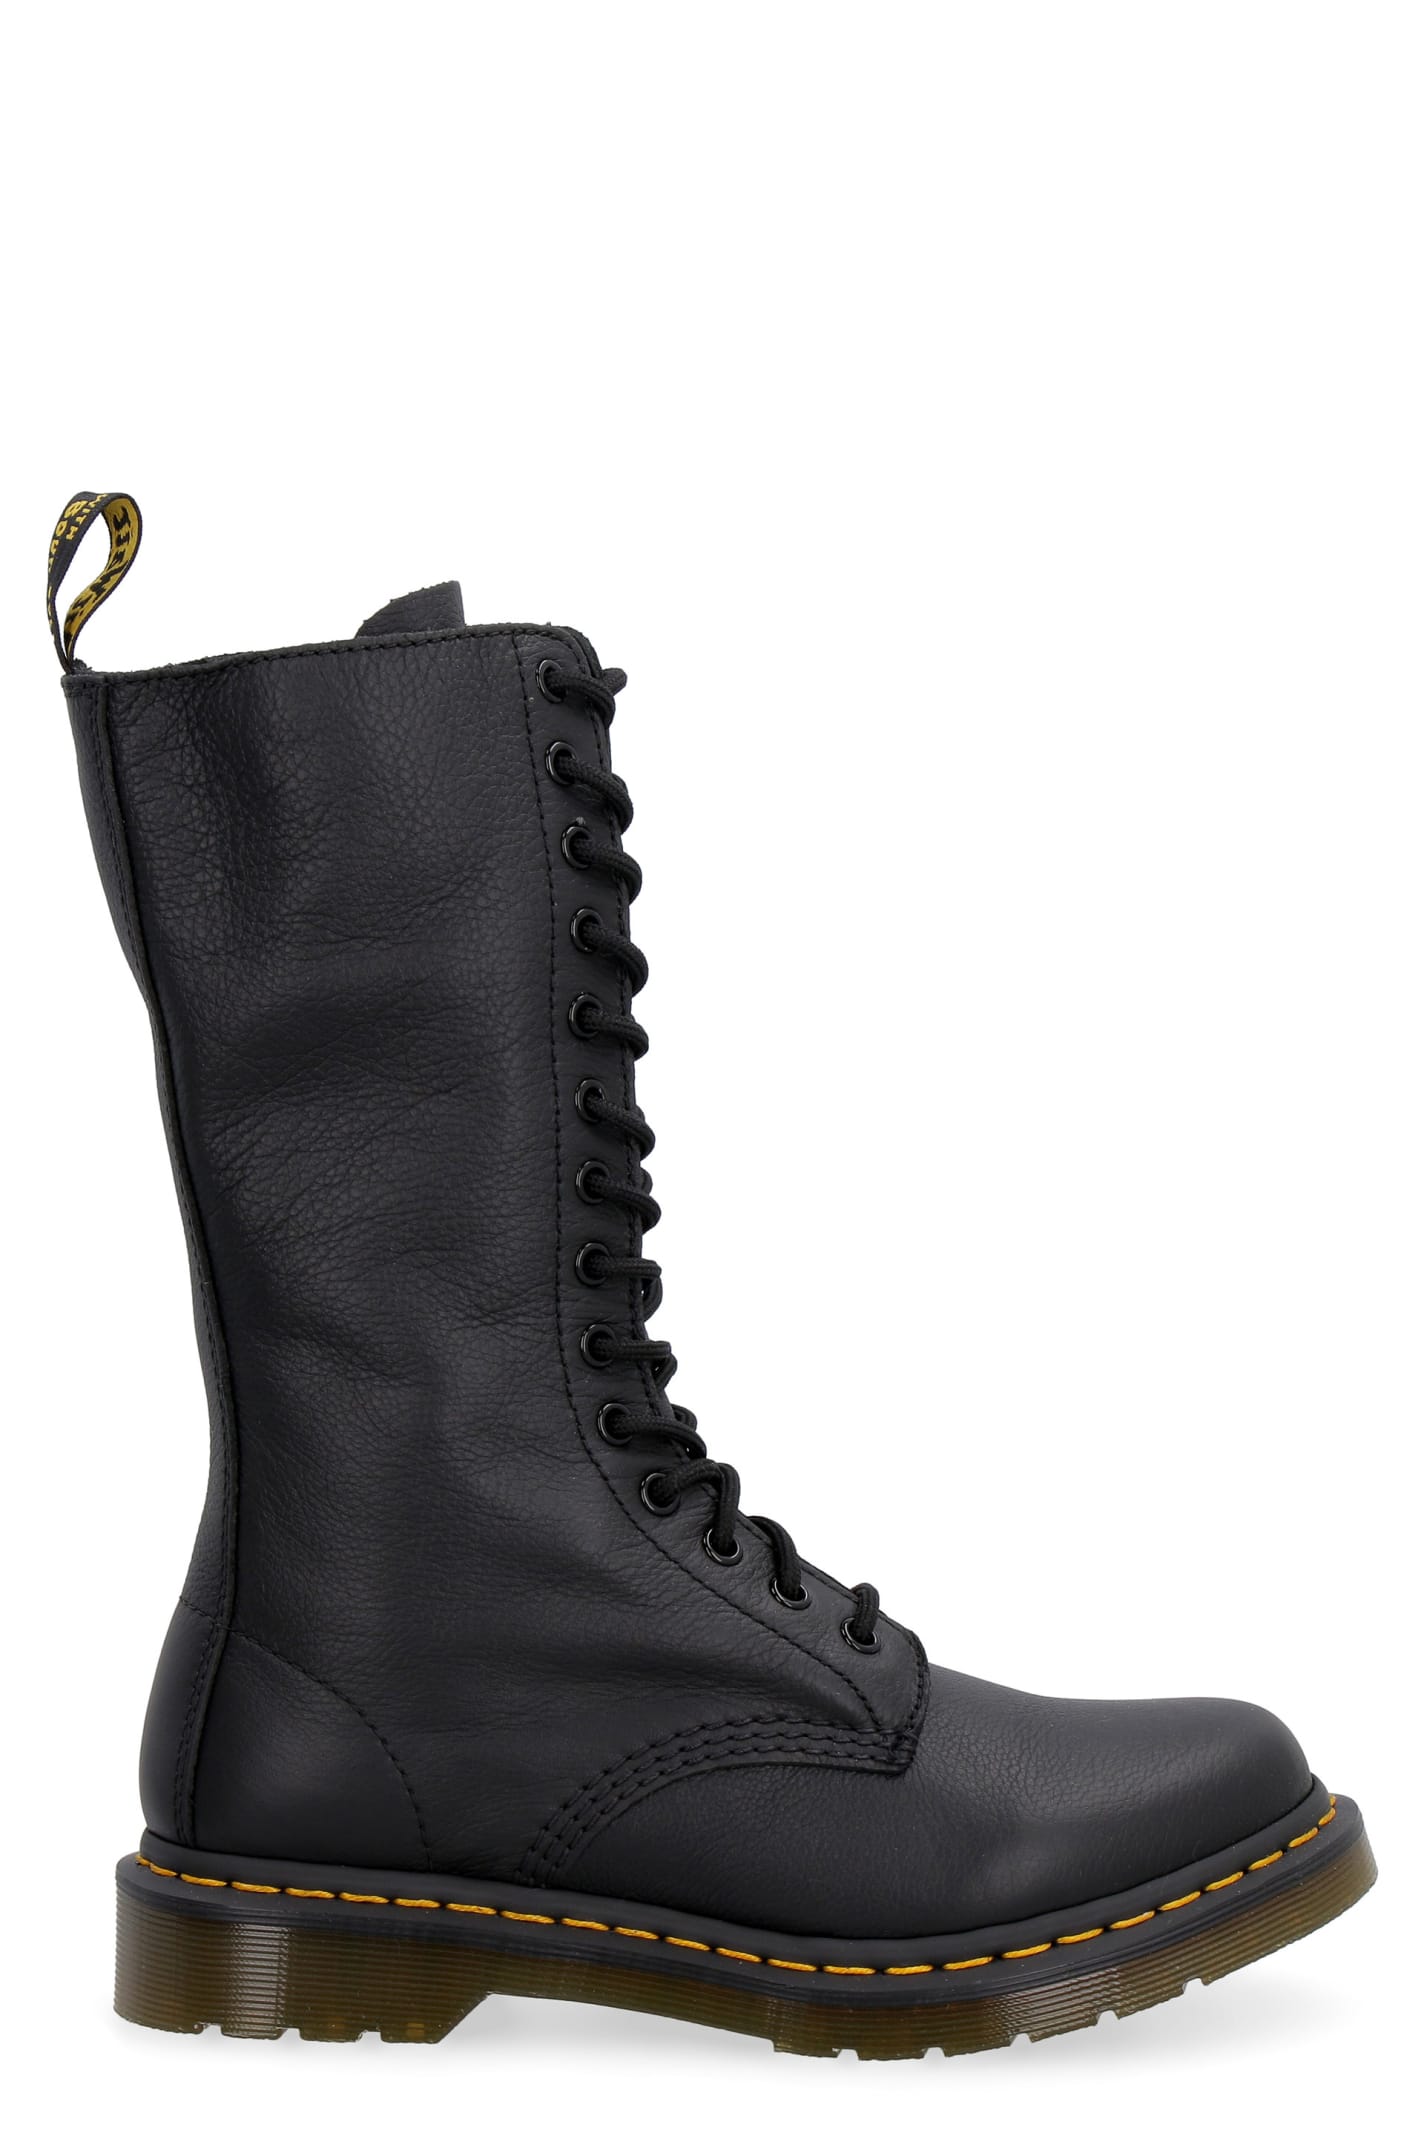 Buy Dr. Martens 1b99 Leather Combat Boots online, shop Dr. Martens shoes with free shipping